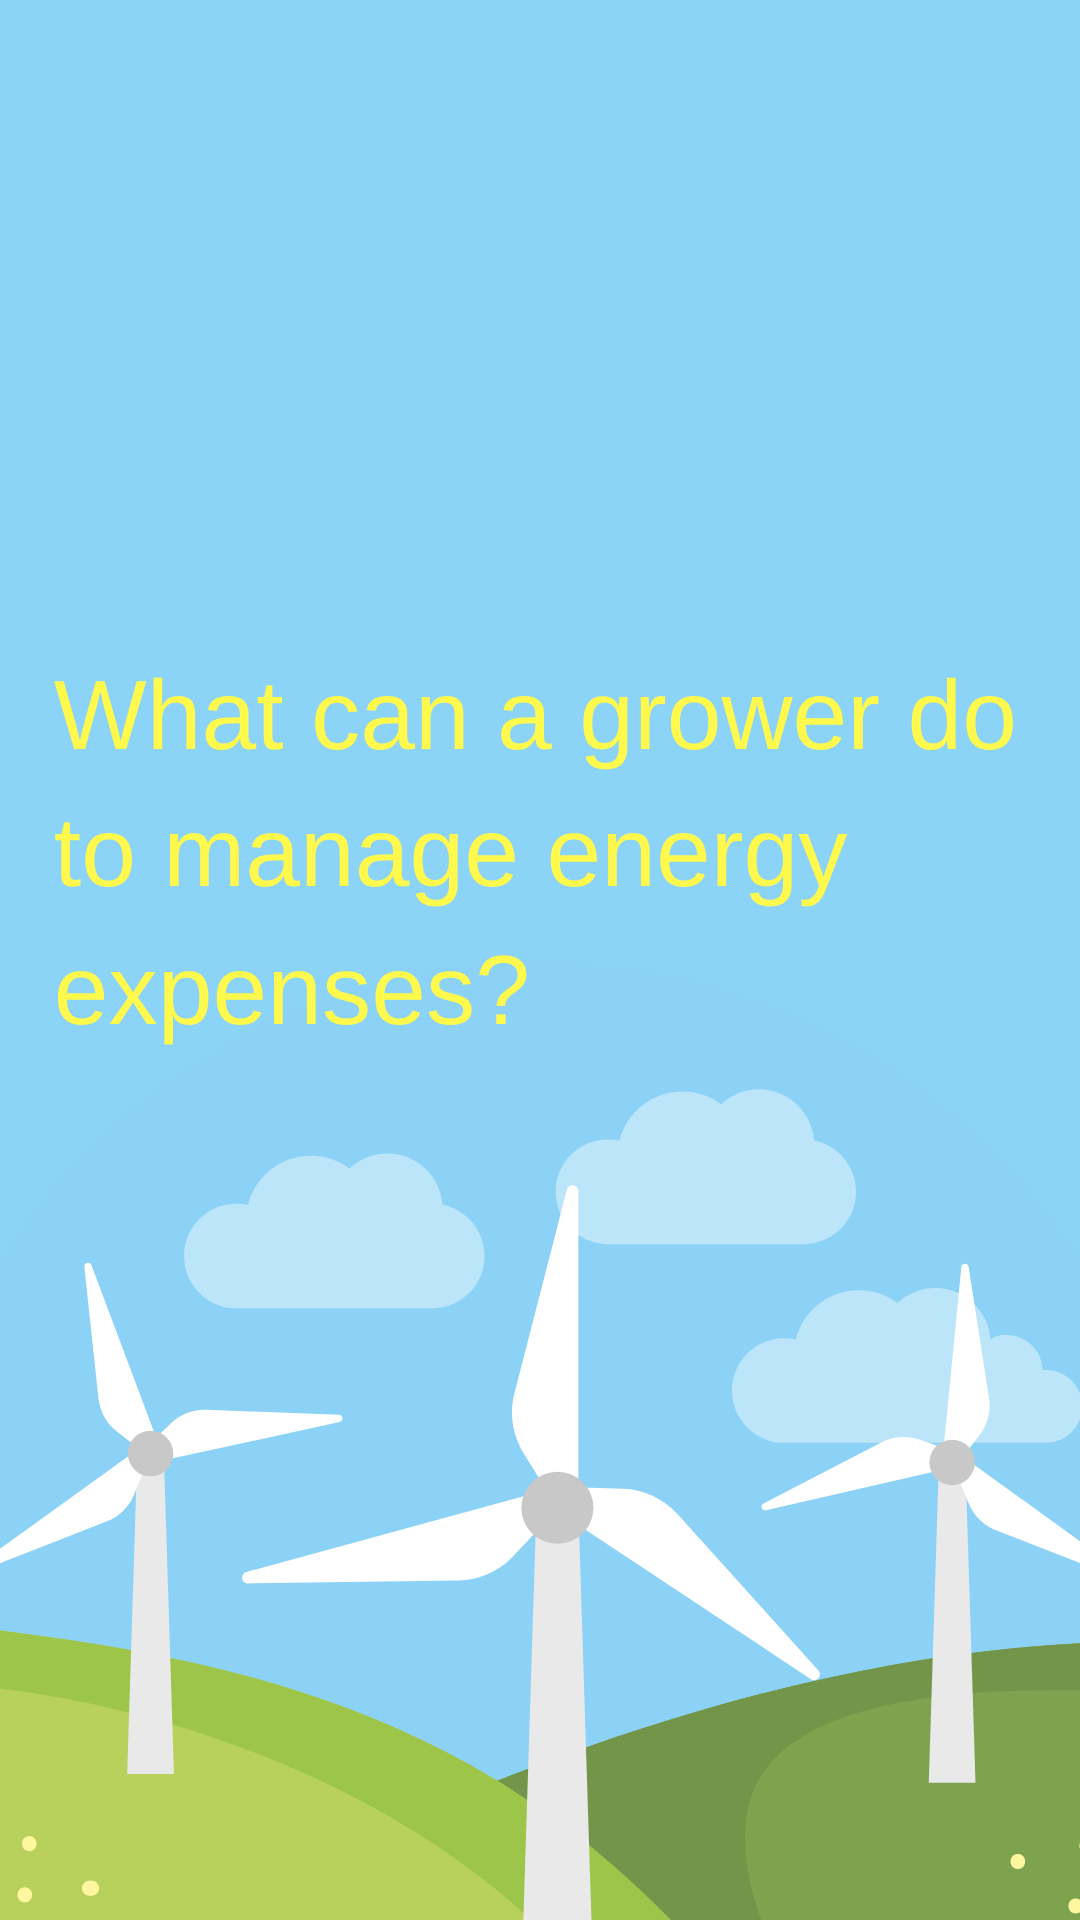 What can a grower do to manage energy expenses?